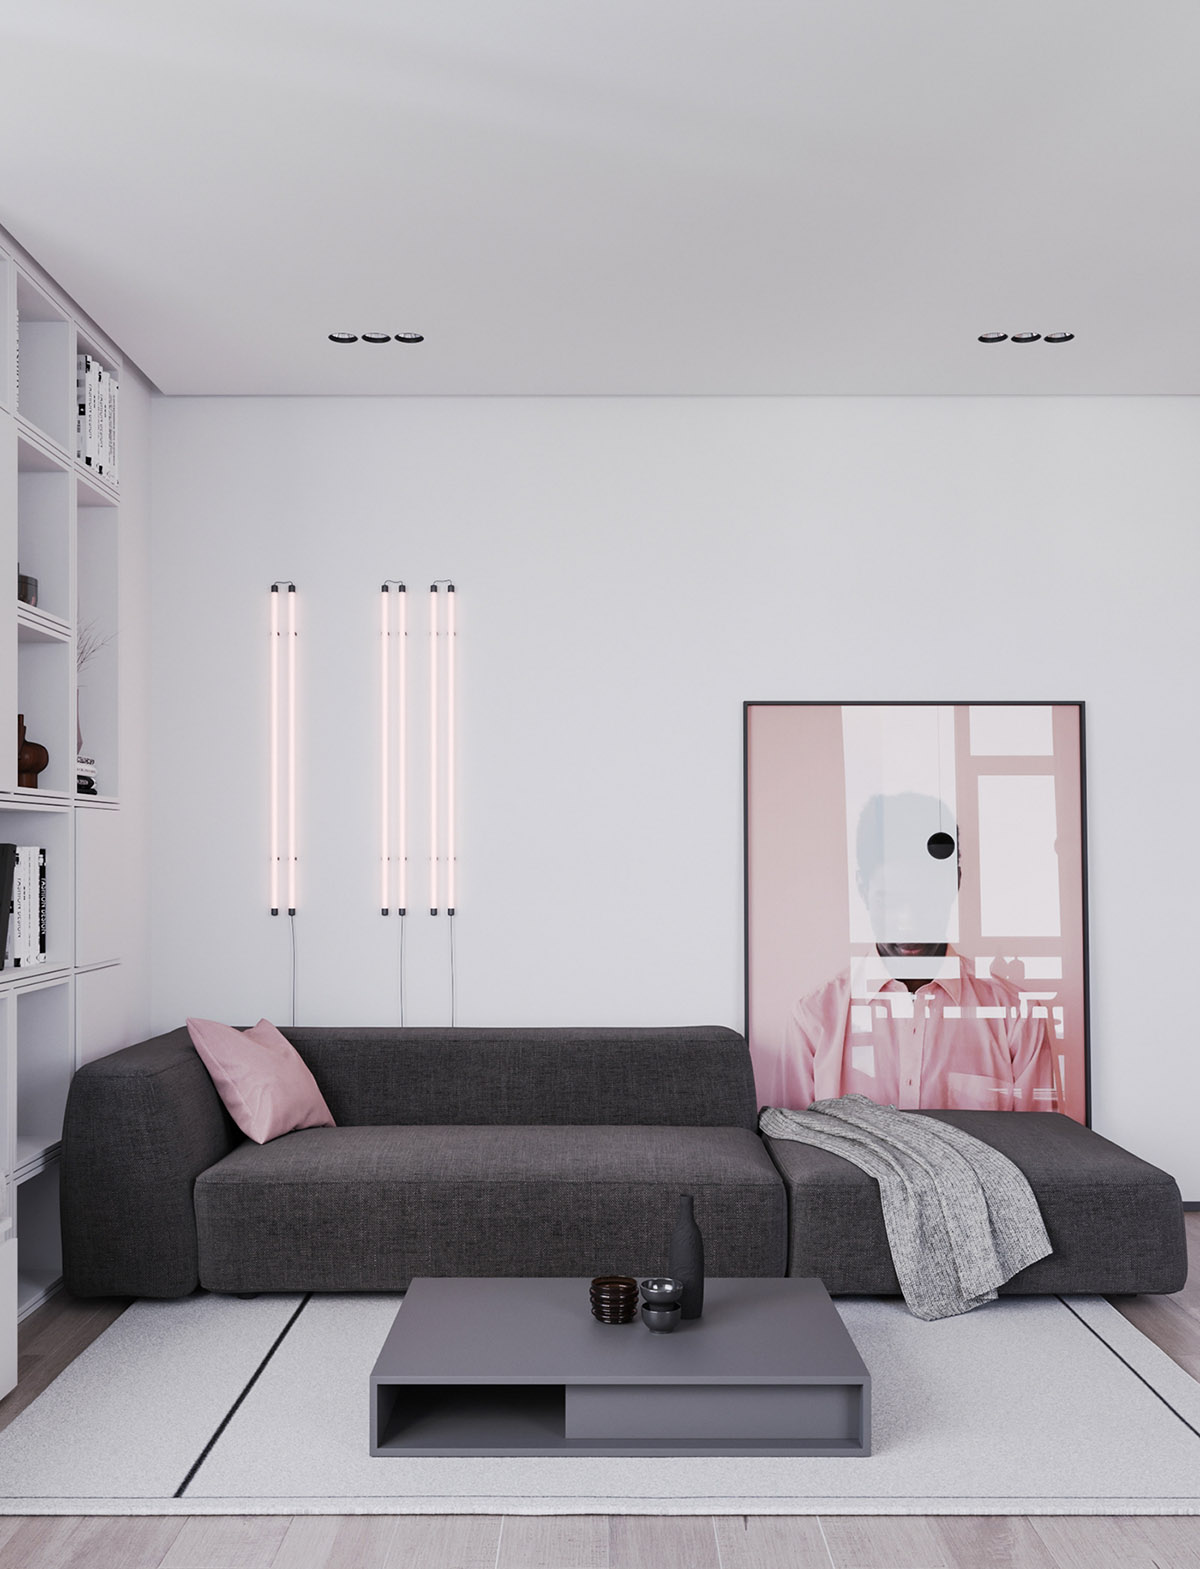 The use of pink in interior design